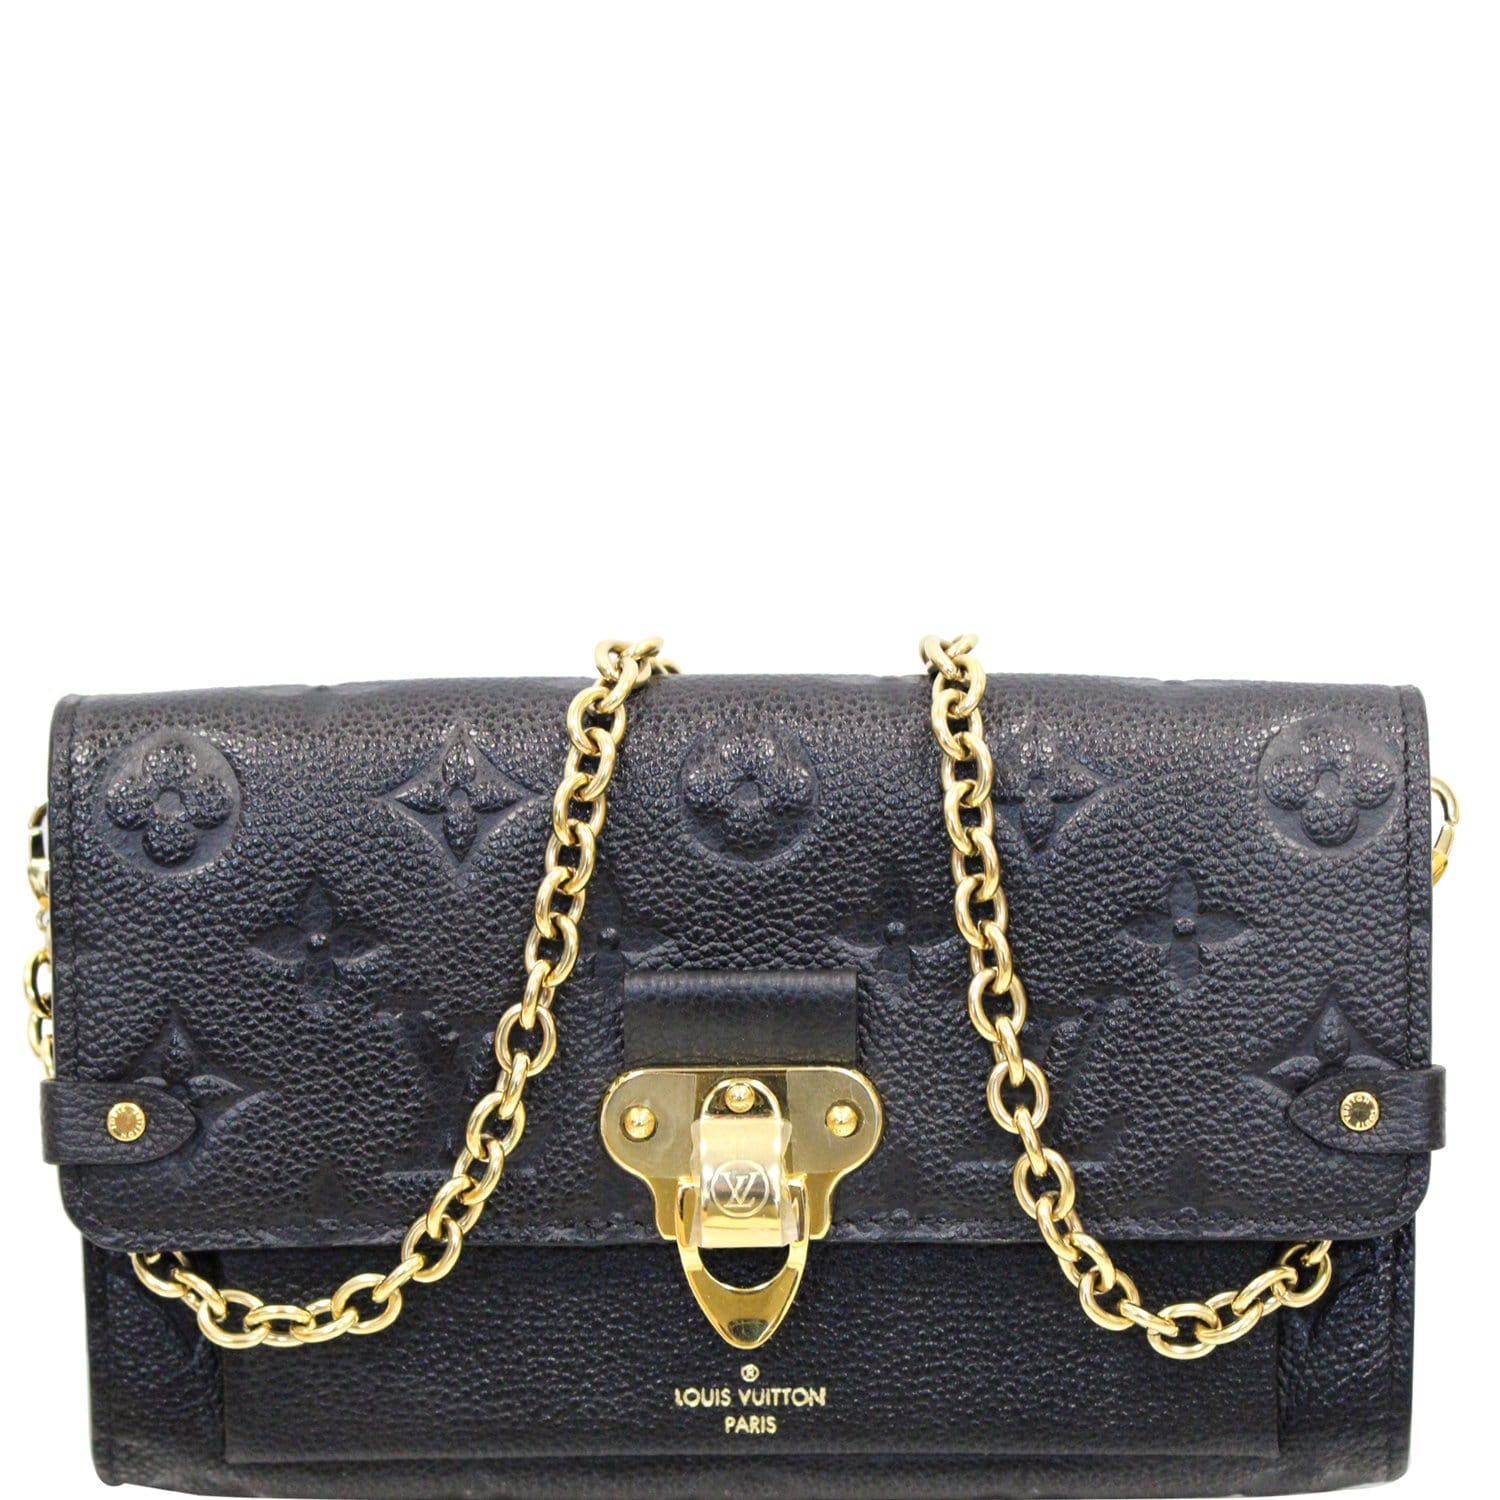 black lv bag with chain